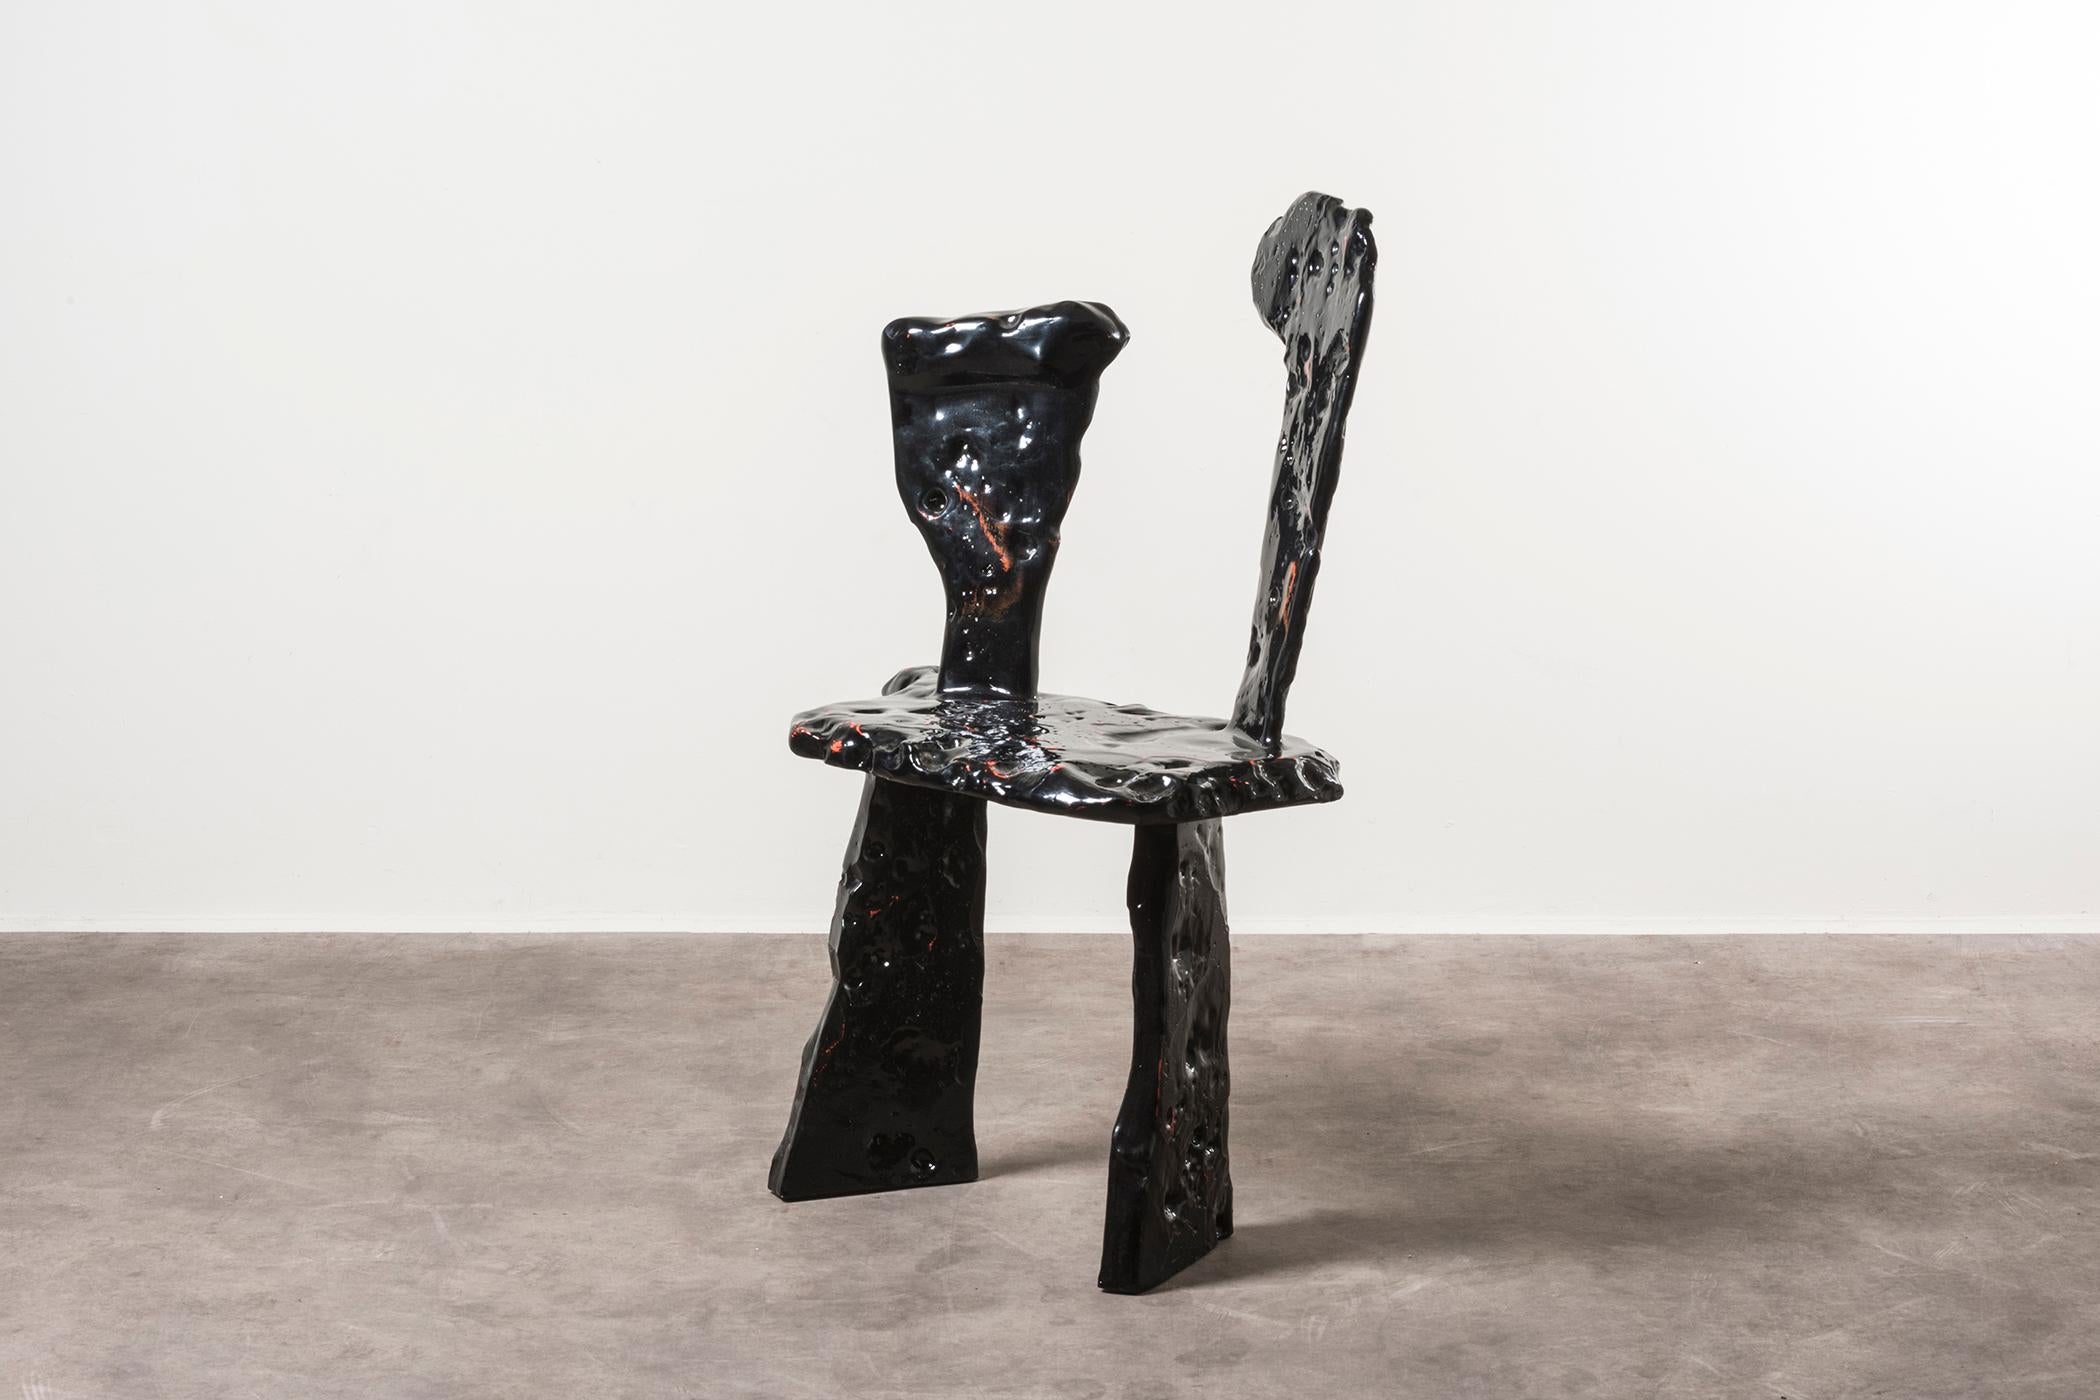 New Labi chair by Alberto Vitelio, Chile, 2019. Nilufar edition. Wood, automotive paint. Measures: 67 x 37 x 100 cm, 26.3 x 4.5 x 39.4 in. Alberto Vitelio comes from several generations of blacksmiths. He grew up in Chile surrounded by fire and